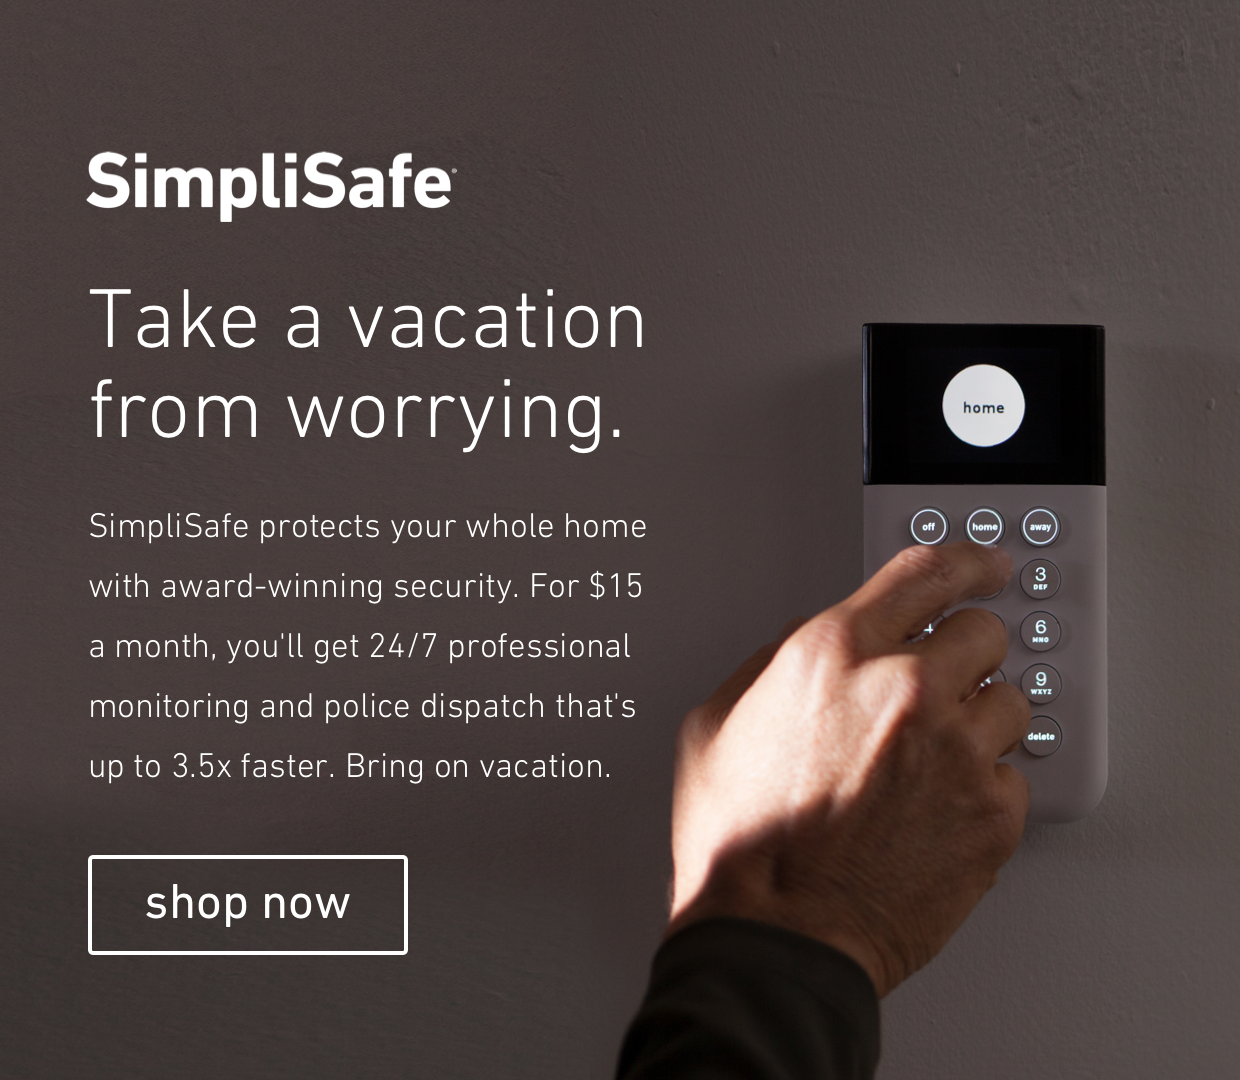 Take a vacation from worrying with SimpliSafe